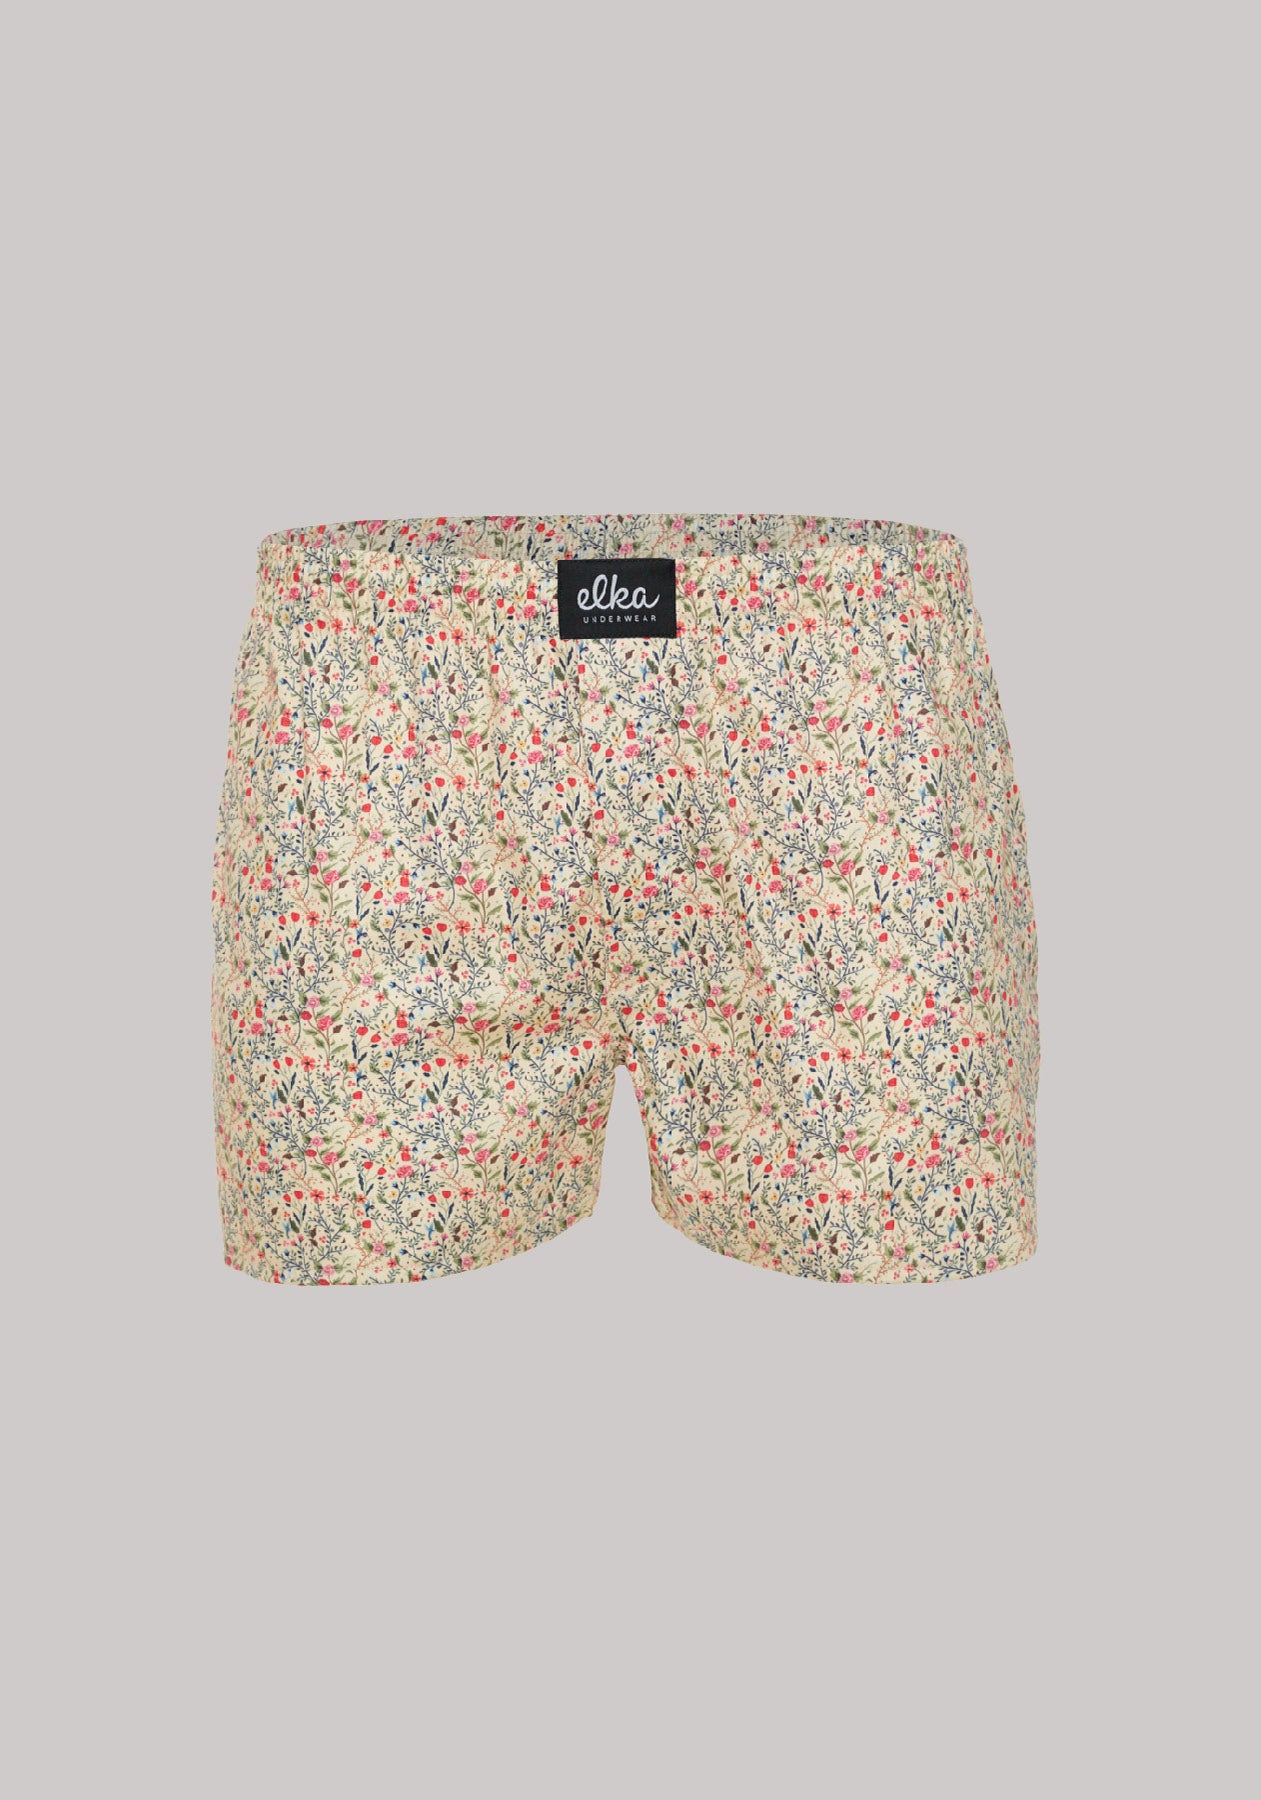 Men's shorts Beige with flowers